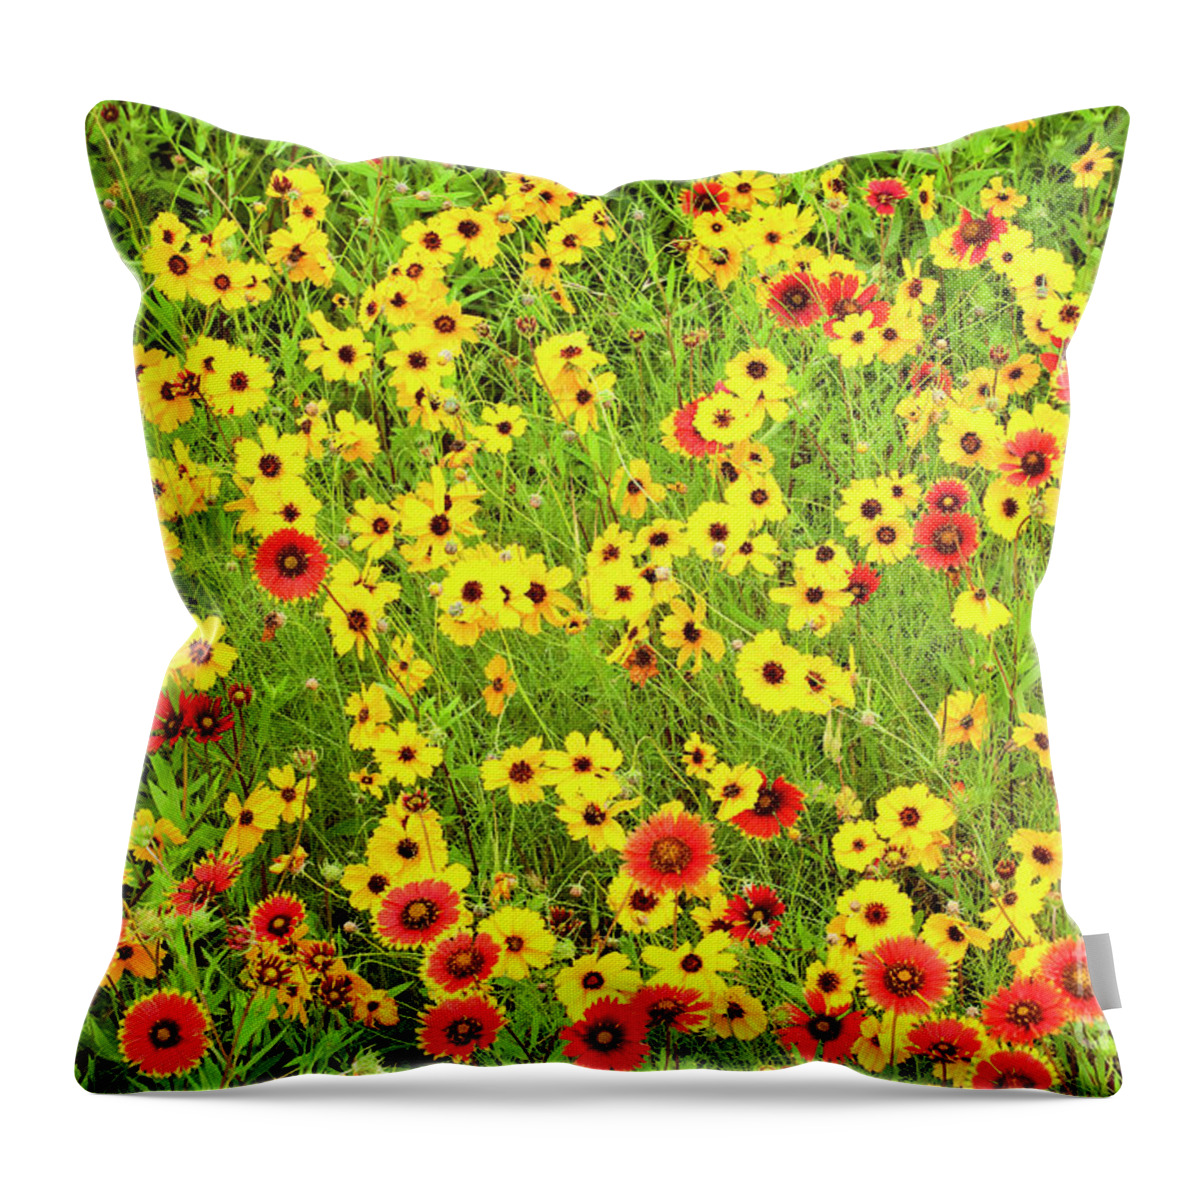 Dave Welling Throw Pillow featuring the photograph Indian Blanketflowers And Coreopsis Texas by Dave Welling